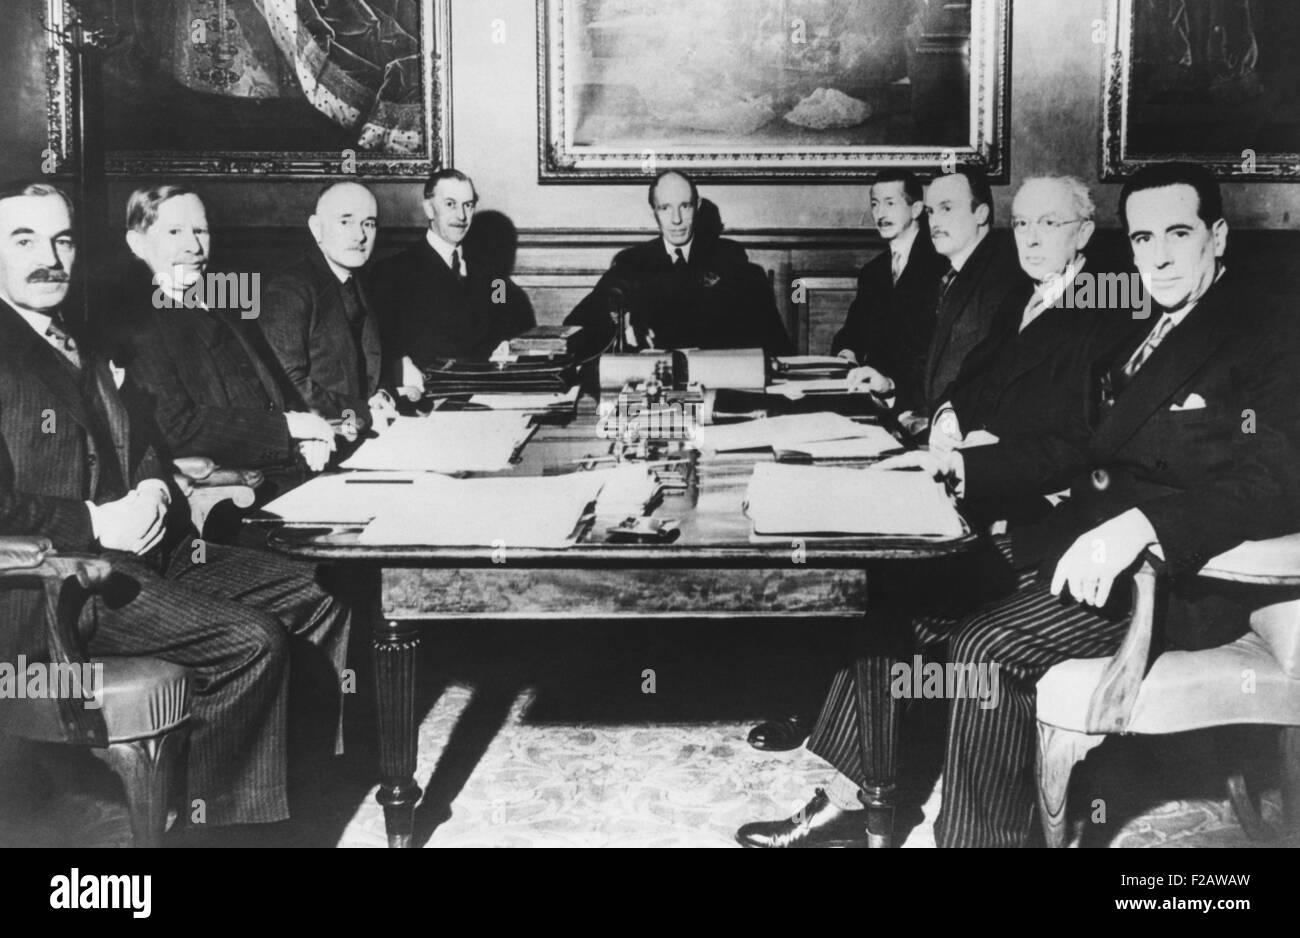 Lord Halifax, Foreign Secretary in Neville Chamberlain's Cabinet presiding over a meeting. April 16, 1940. He met with Britain's ambassadors to plan for a diplomatic and economic offensive against Germany. Halifax favored a negotiated a peace settlement with Hitler, but within a month Winston Churchill was Prime Minister. L-R: Donald Campbell, Yugoslavia; Reginald Hoare, Romania; Hughe Knatchbull-Hugessen, Turkey; Percy Lorene, Italy; Lord Halifax; William Seeds, Soviet Union; Charles Parairet, Greece; Owen St. C. O'Malley, Hungry; George Rendell, Bulgaria. (CSU 2015 11 1446) Stock Photo